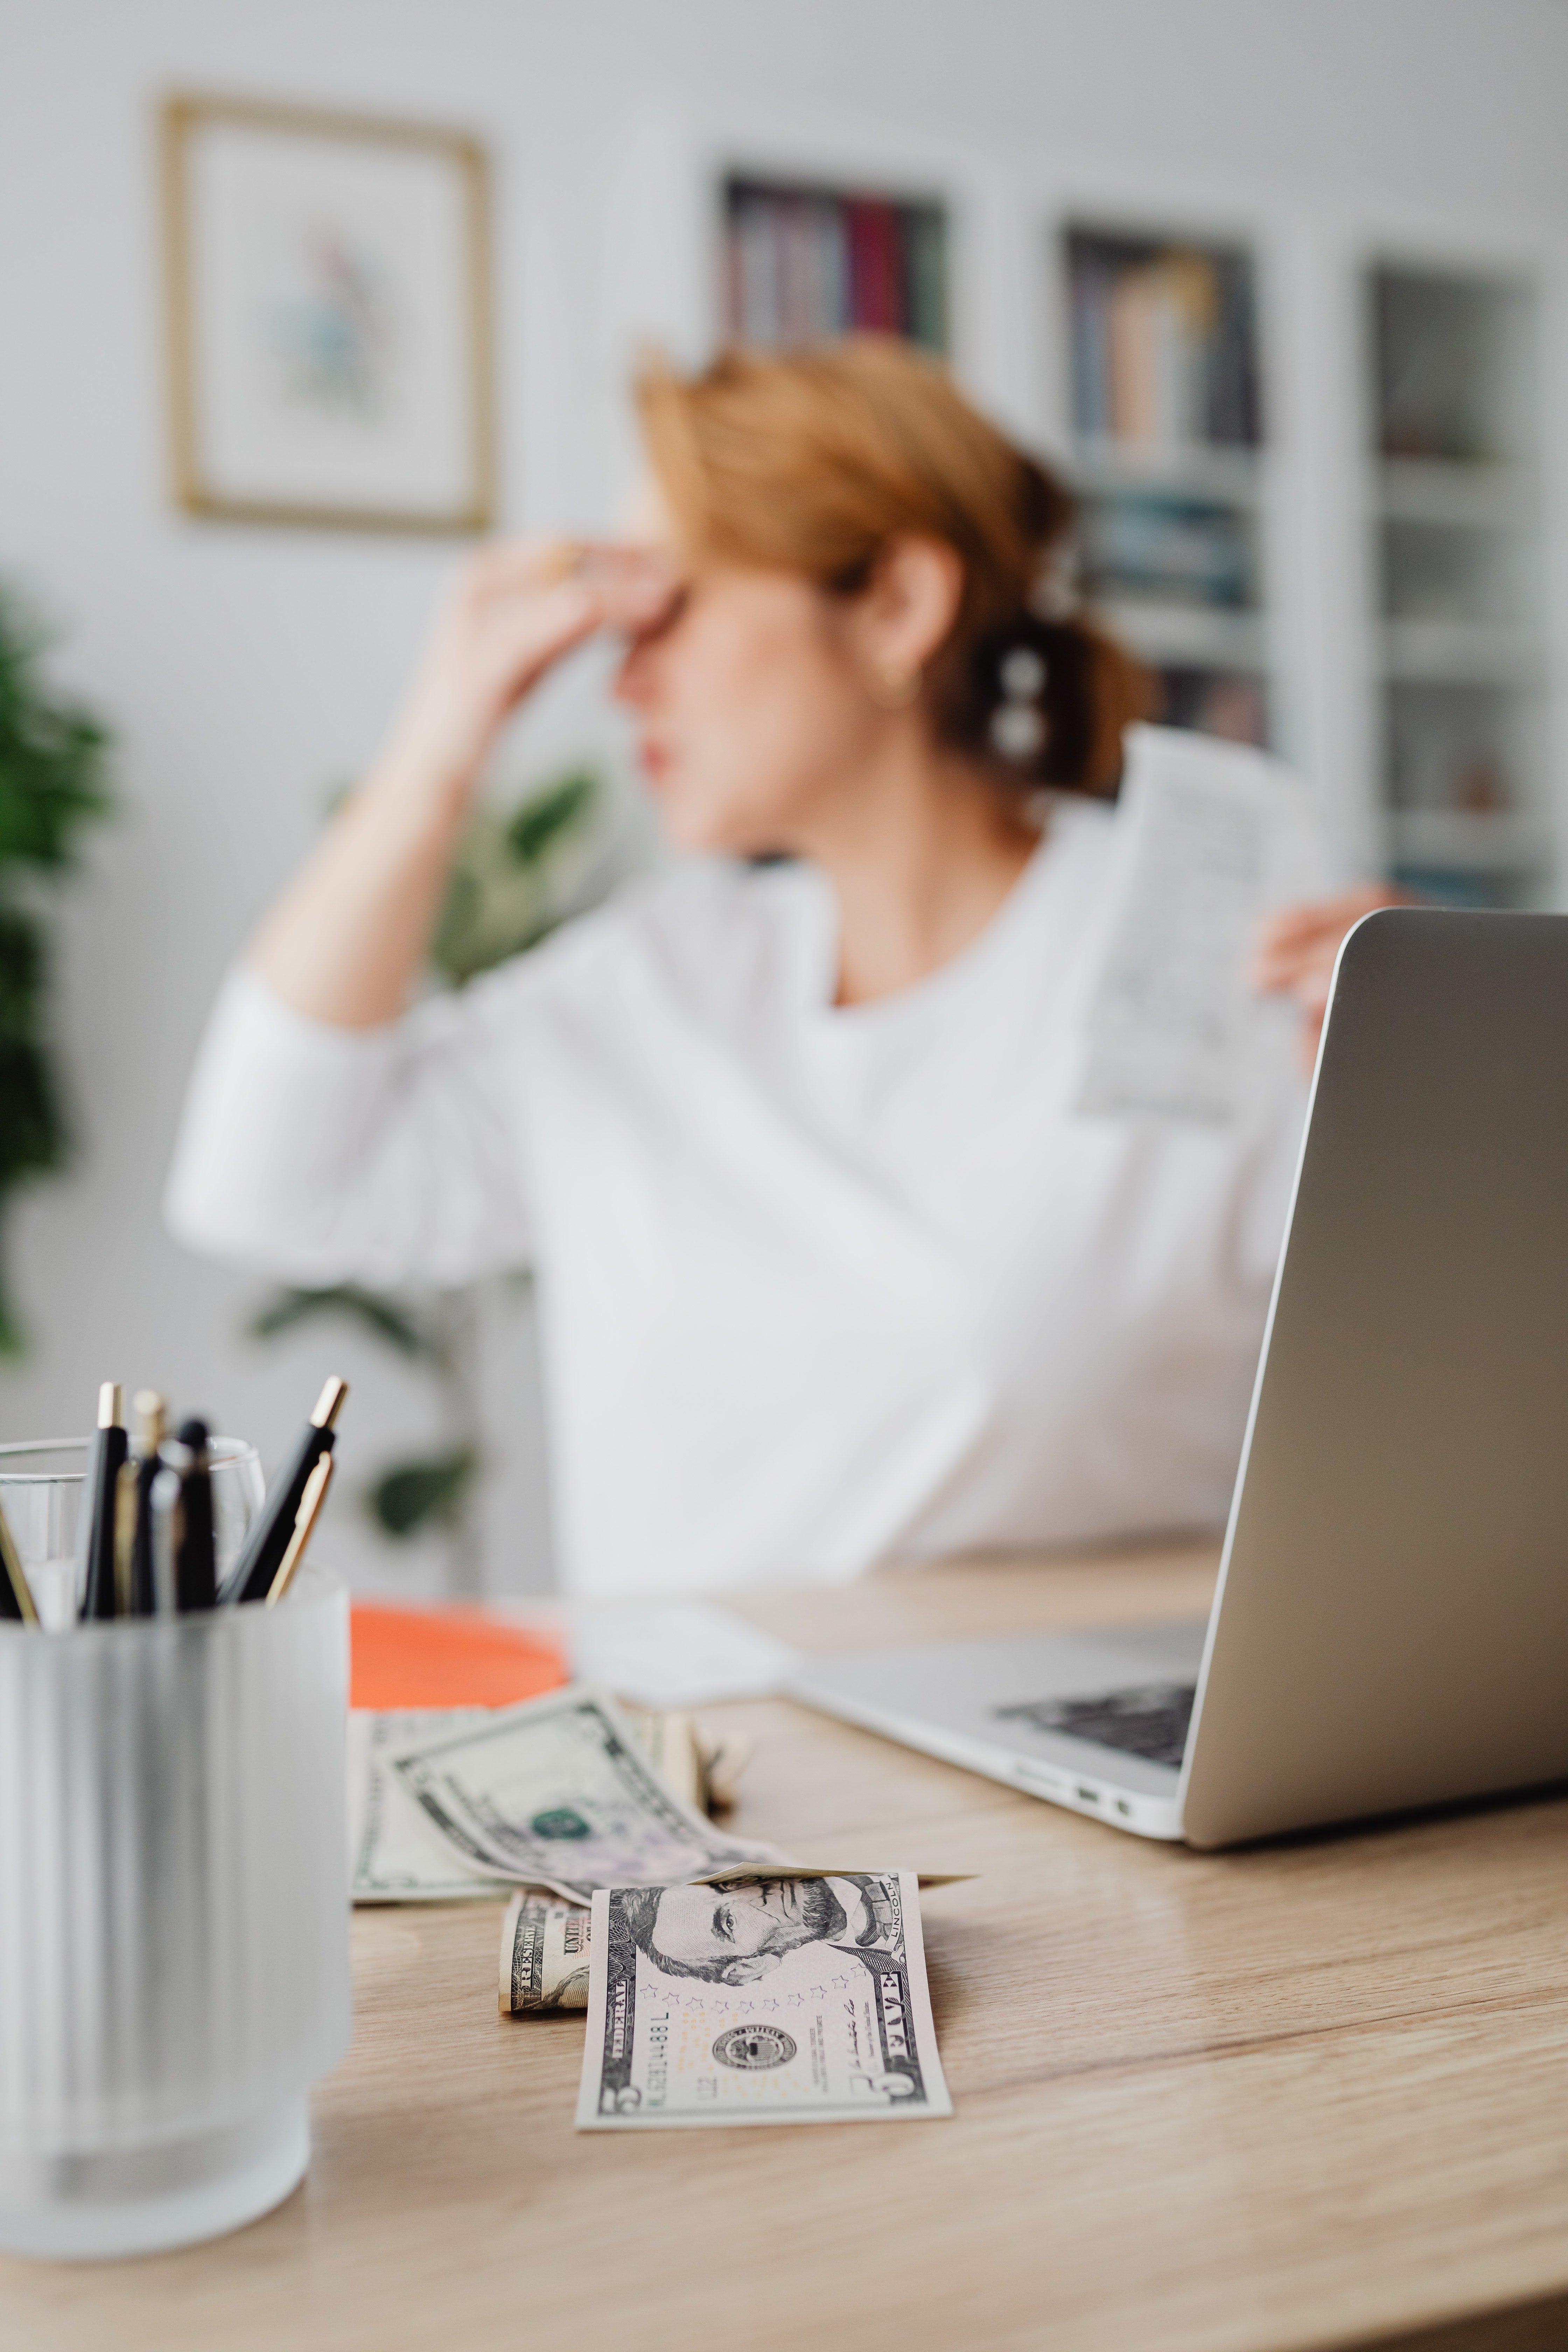 Melissa struggled to pay the bills. | Source: Pexels